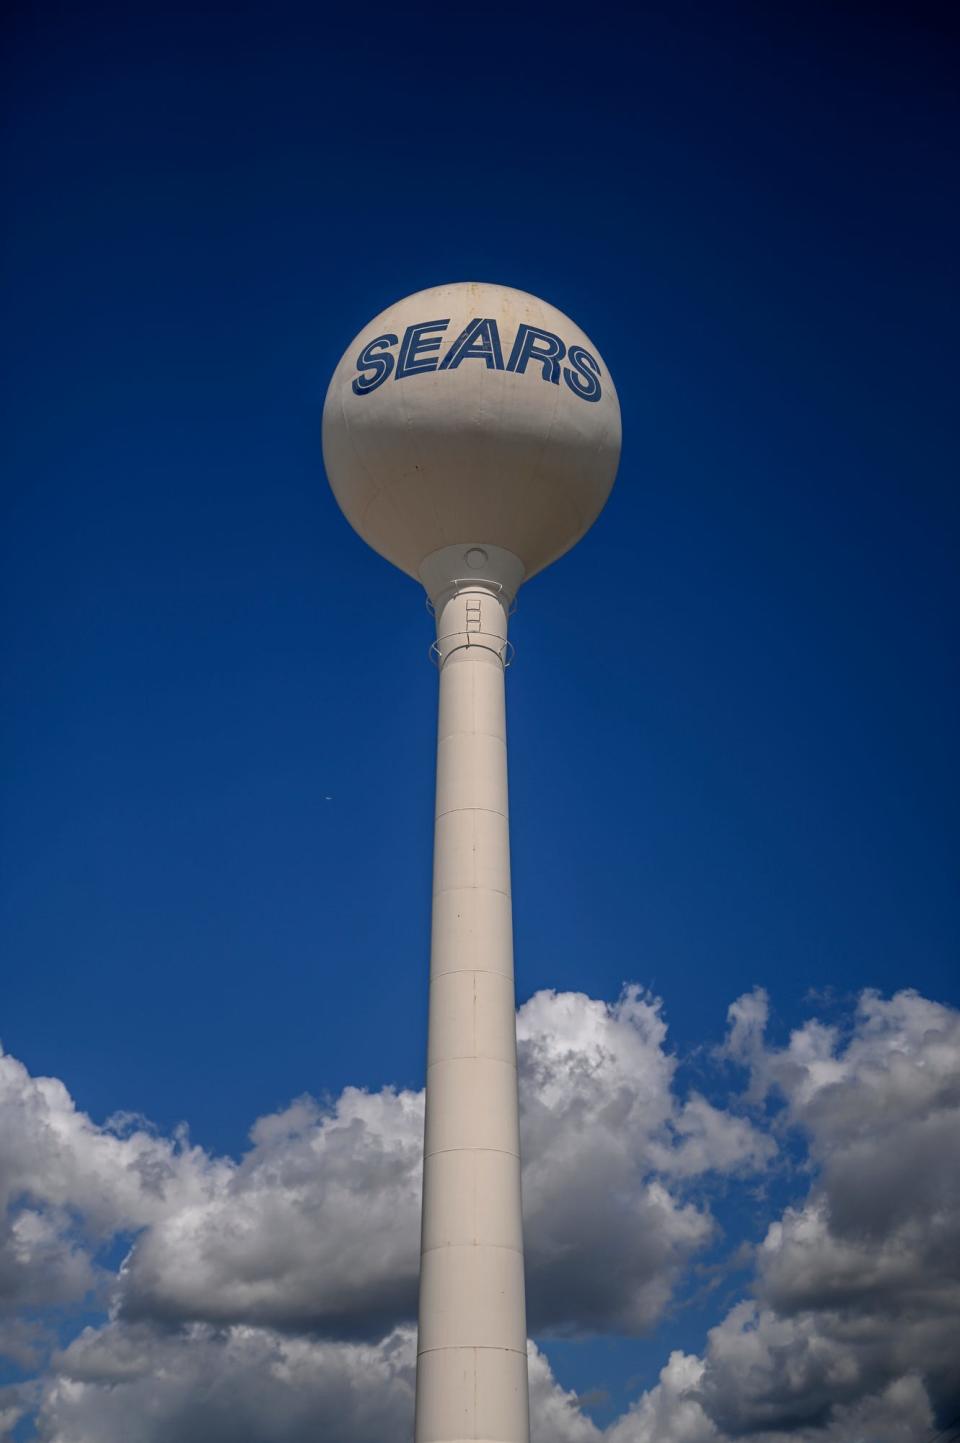 The Sears water tower in the Frandor Shopping Center on Wednesday, Sept. 8, 2021, in Lansing.